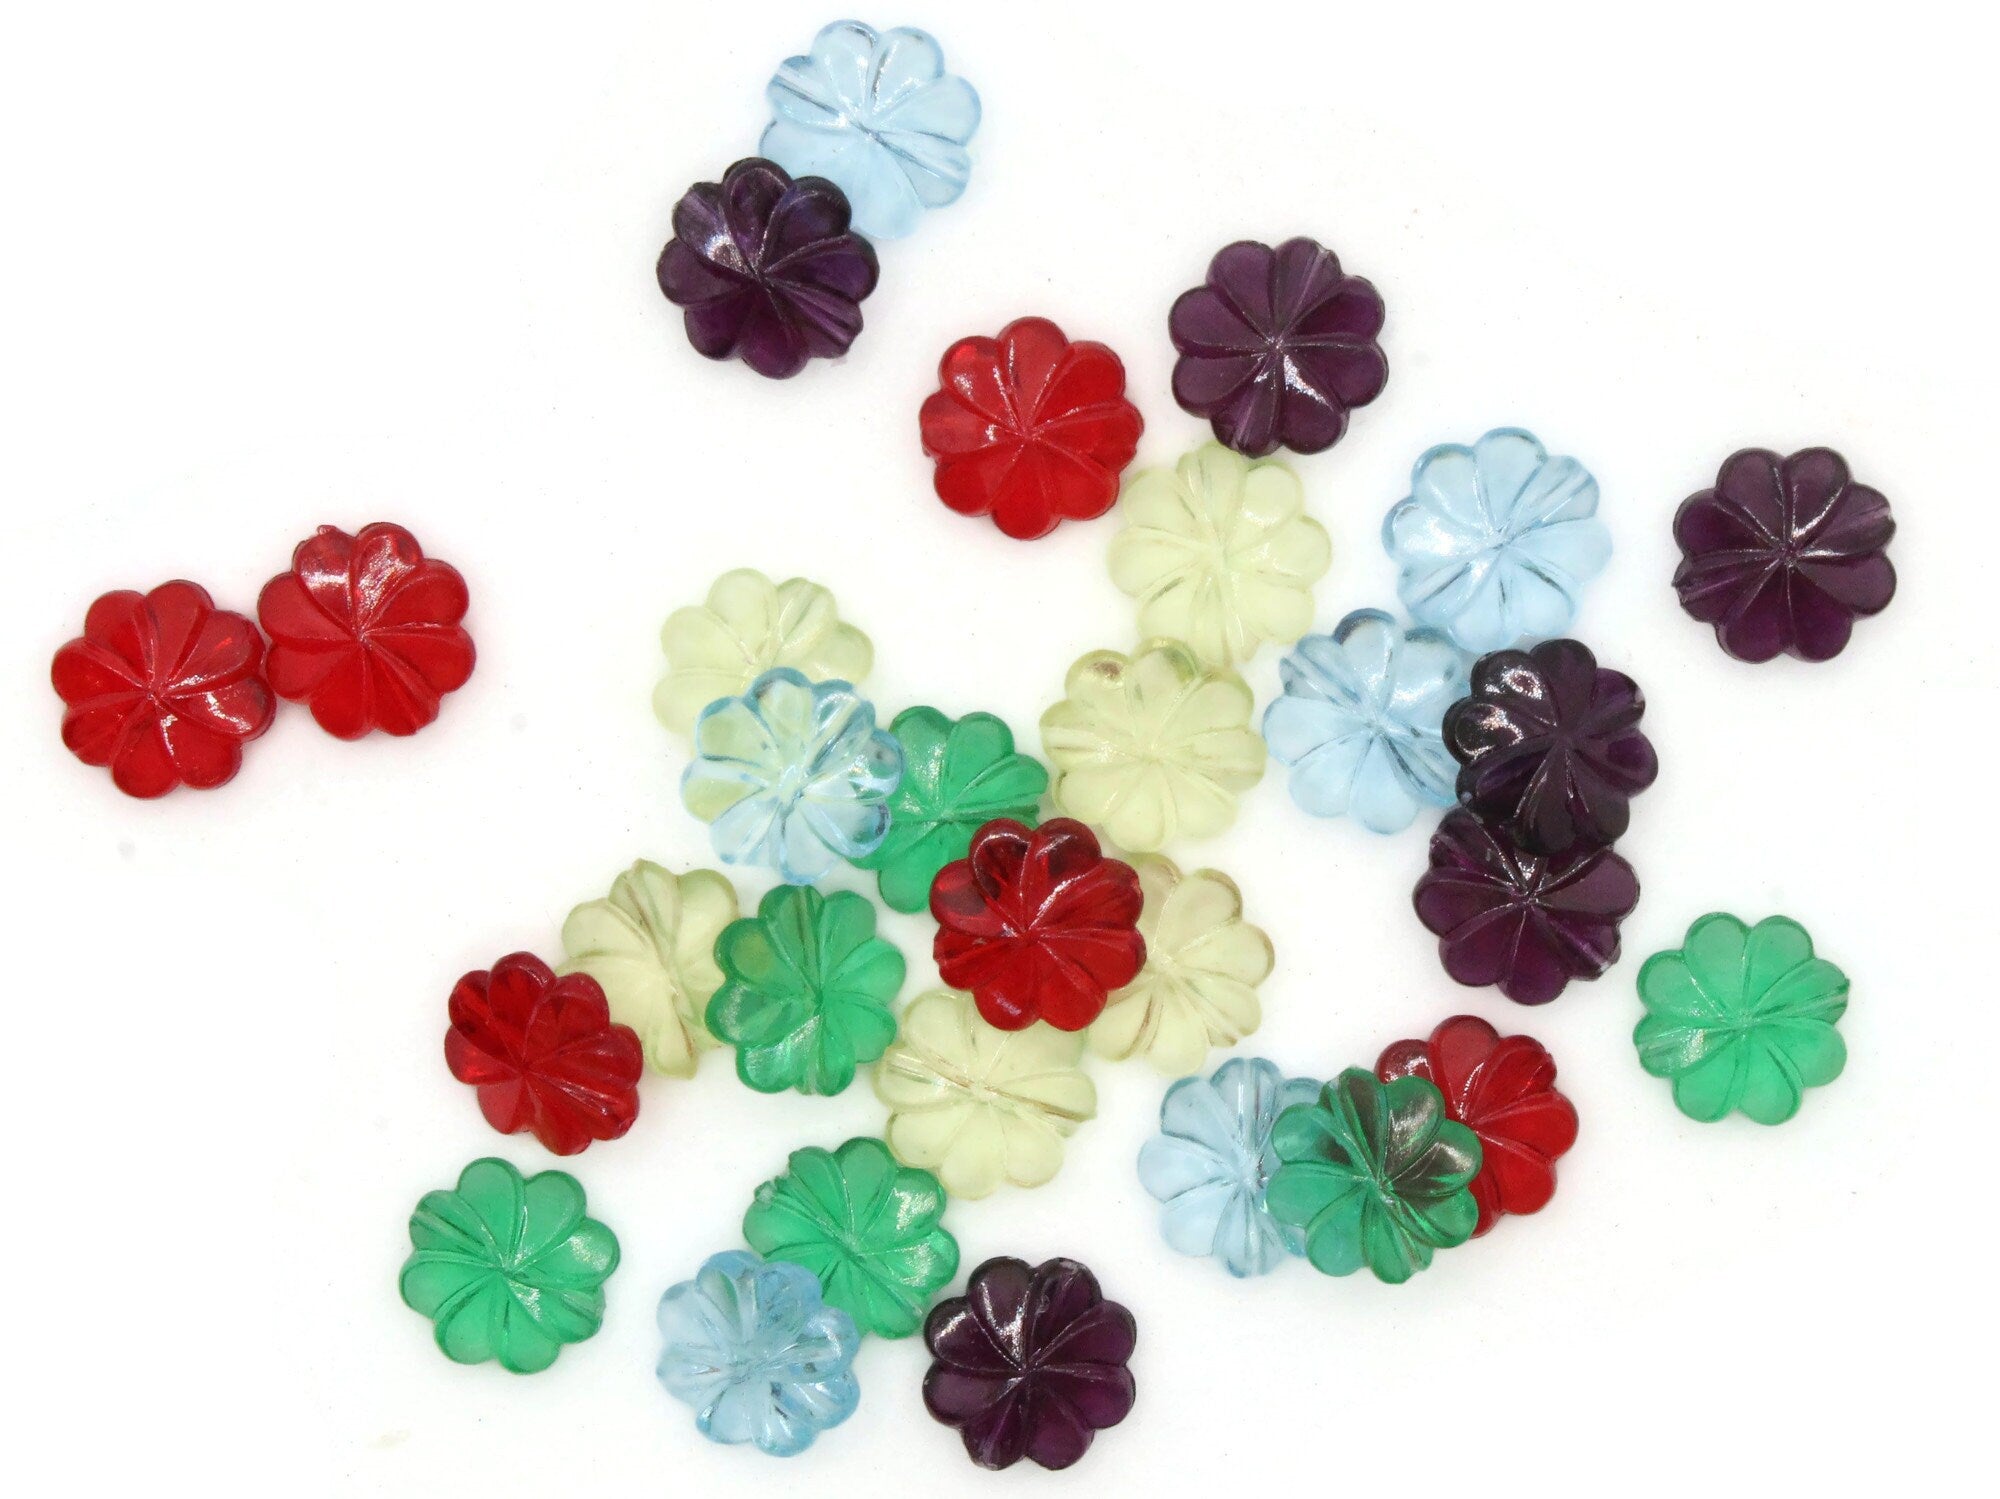 30 12mm Vintage Flower Five Color Mix Floral Disc Beads by Smileyboy Beads | Michaels